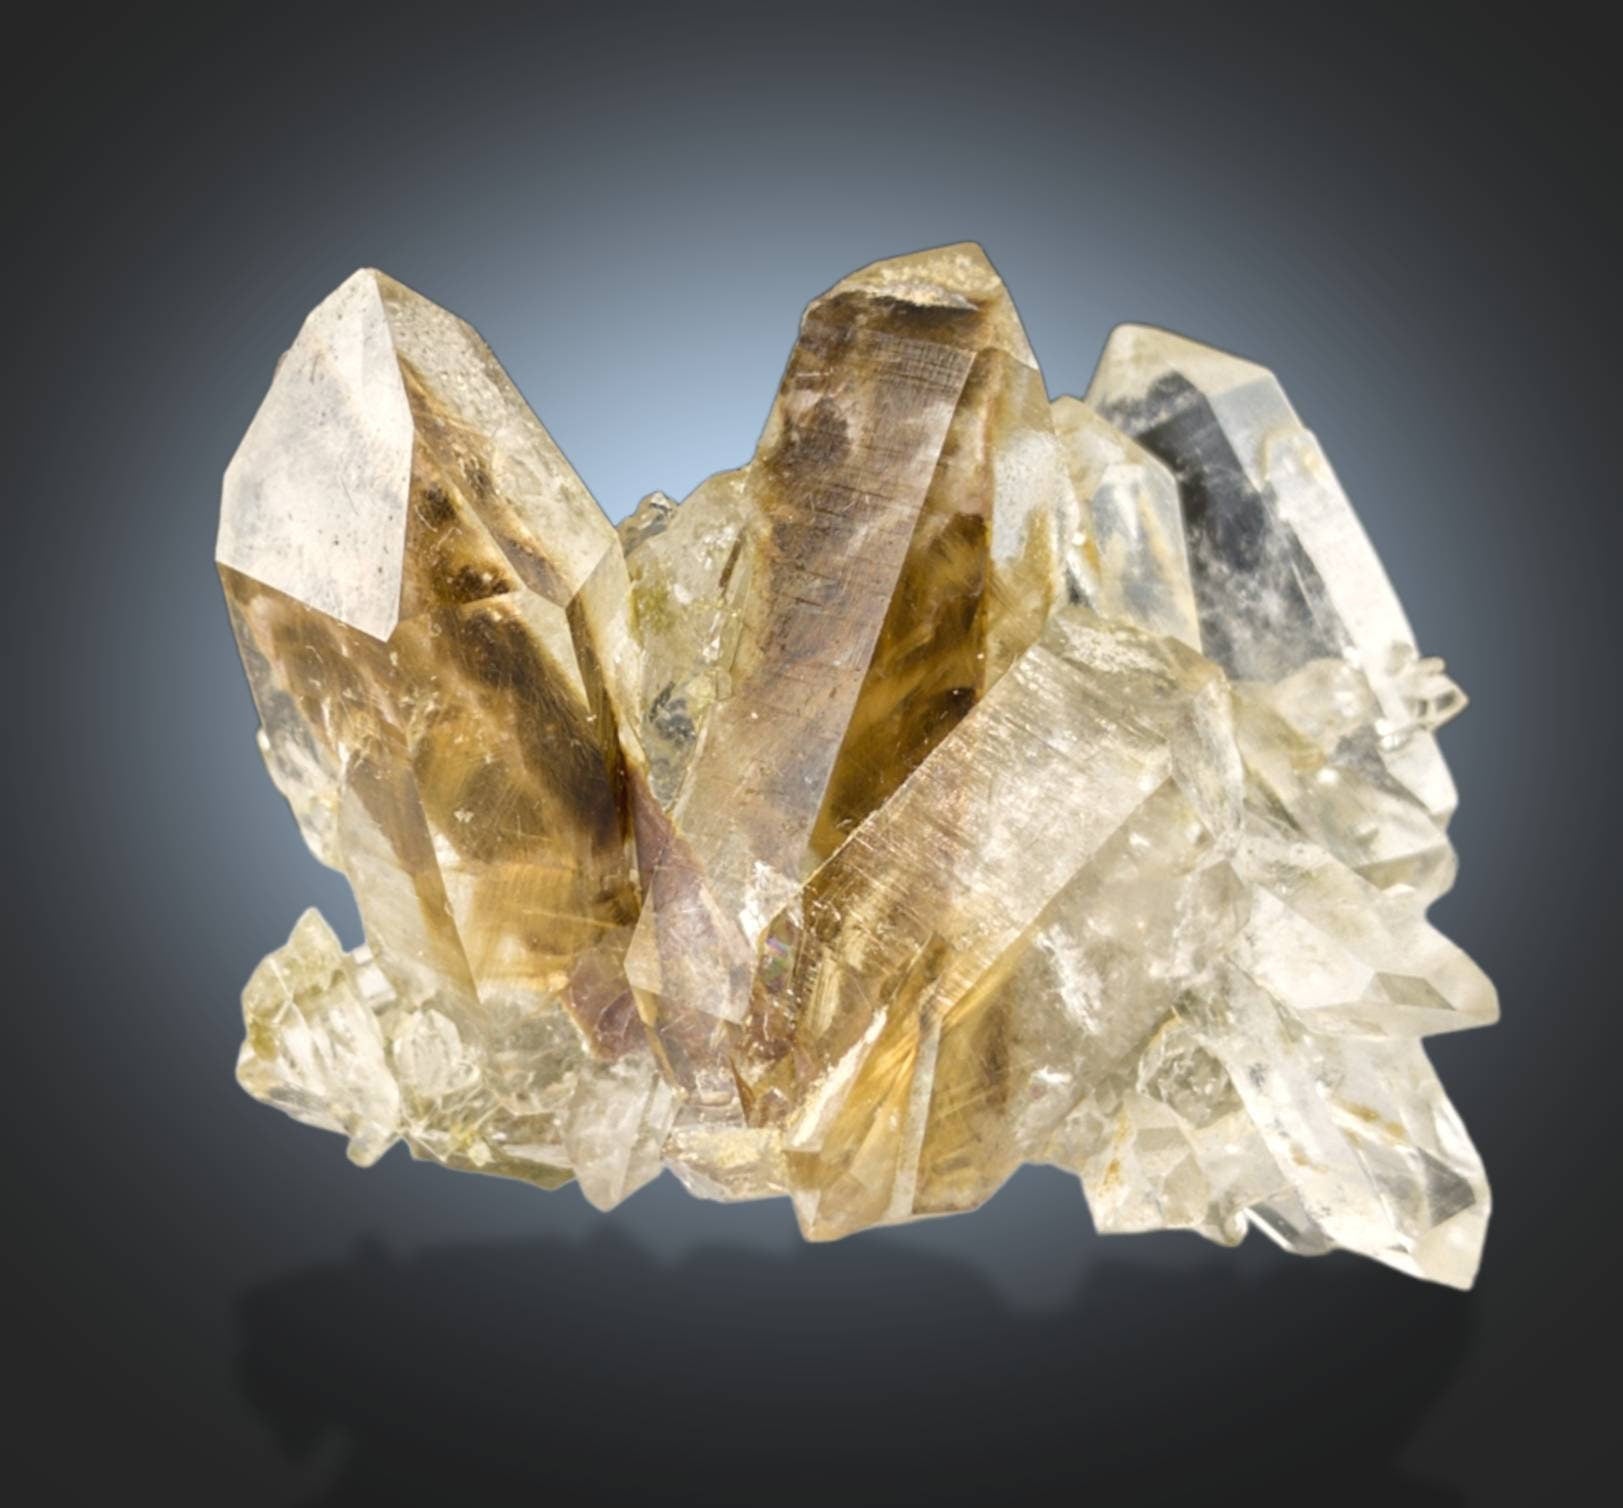 ARSAA GEMS AND MINERALSRutile and Brookite  included quartz cluster with chlorite inclusions.  from Kharan, Baluchistan, Pakistan, 30.5 grams - Premium  from ARSAA GEMS AND MINERALS - Just $200.00! Shop now at ARSAA GEMS AND MINERALS